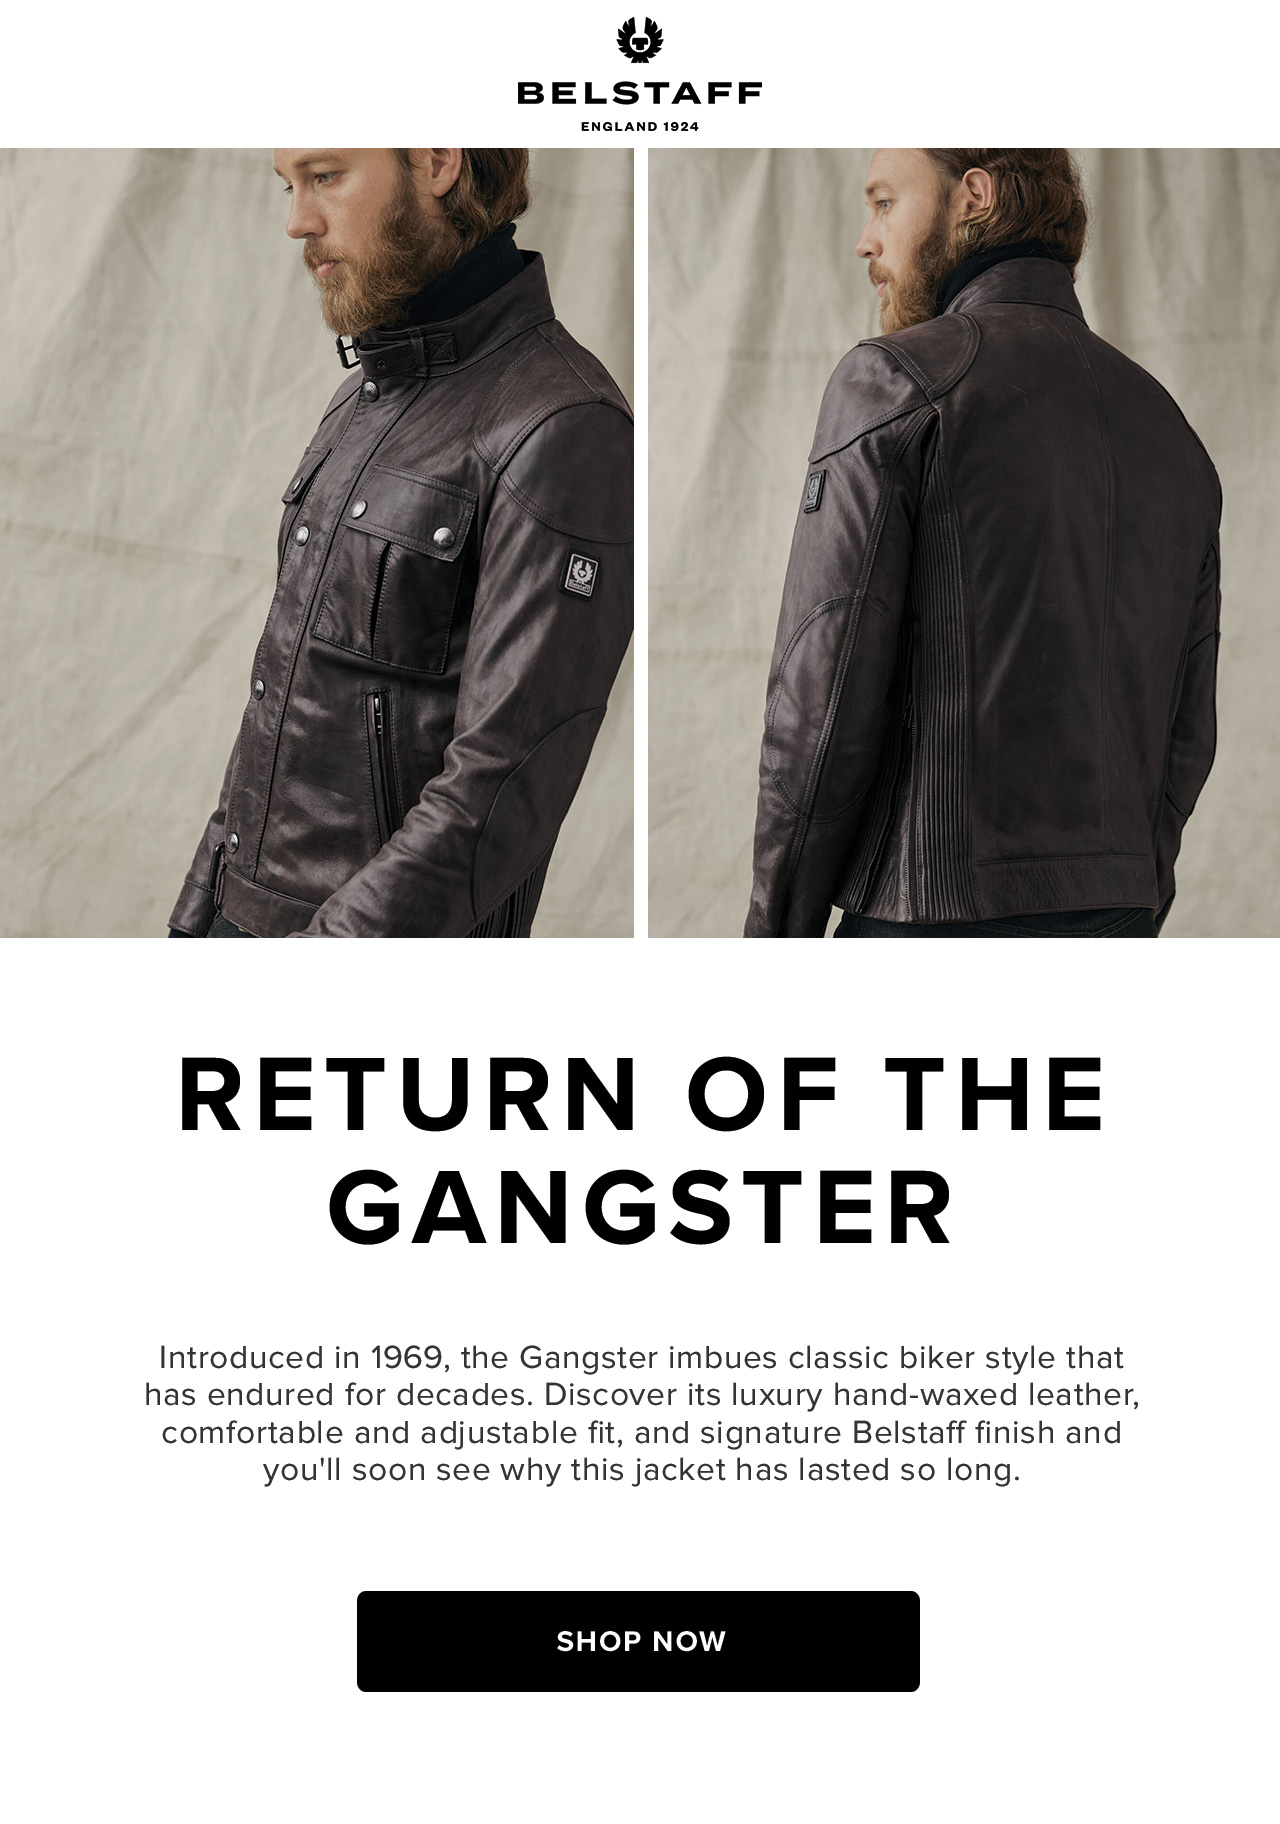 Introduced in 1969, the Gangster imbues classic biker style that has endured for decades. Discover its luxury hand-waxed leather, comfortable and adjustable fit, and signature Belstaff finish and you''ll soon see why this jacket has lasted so long.